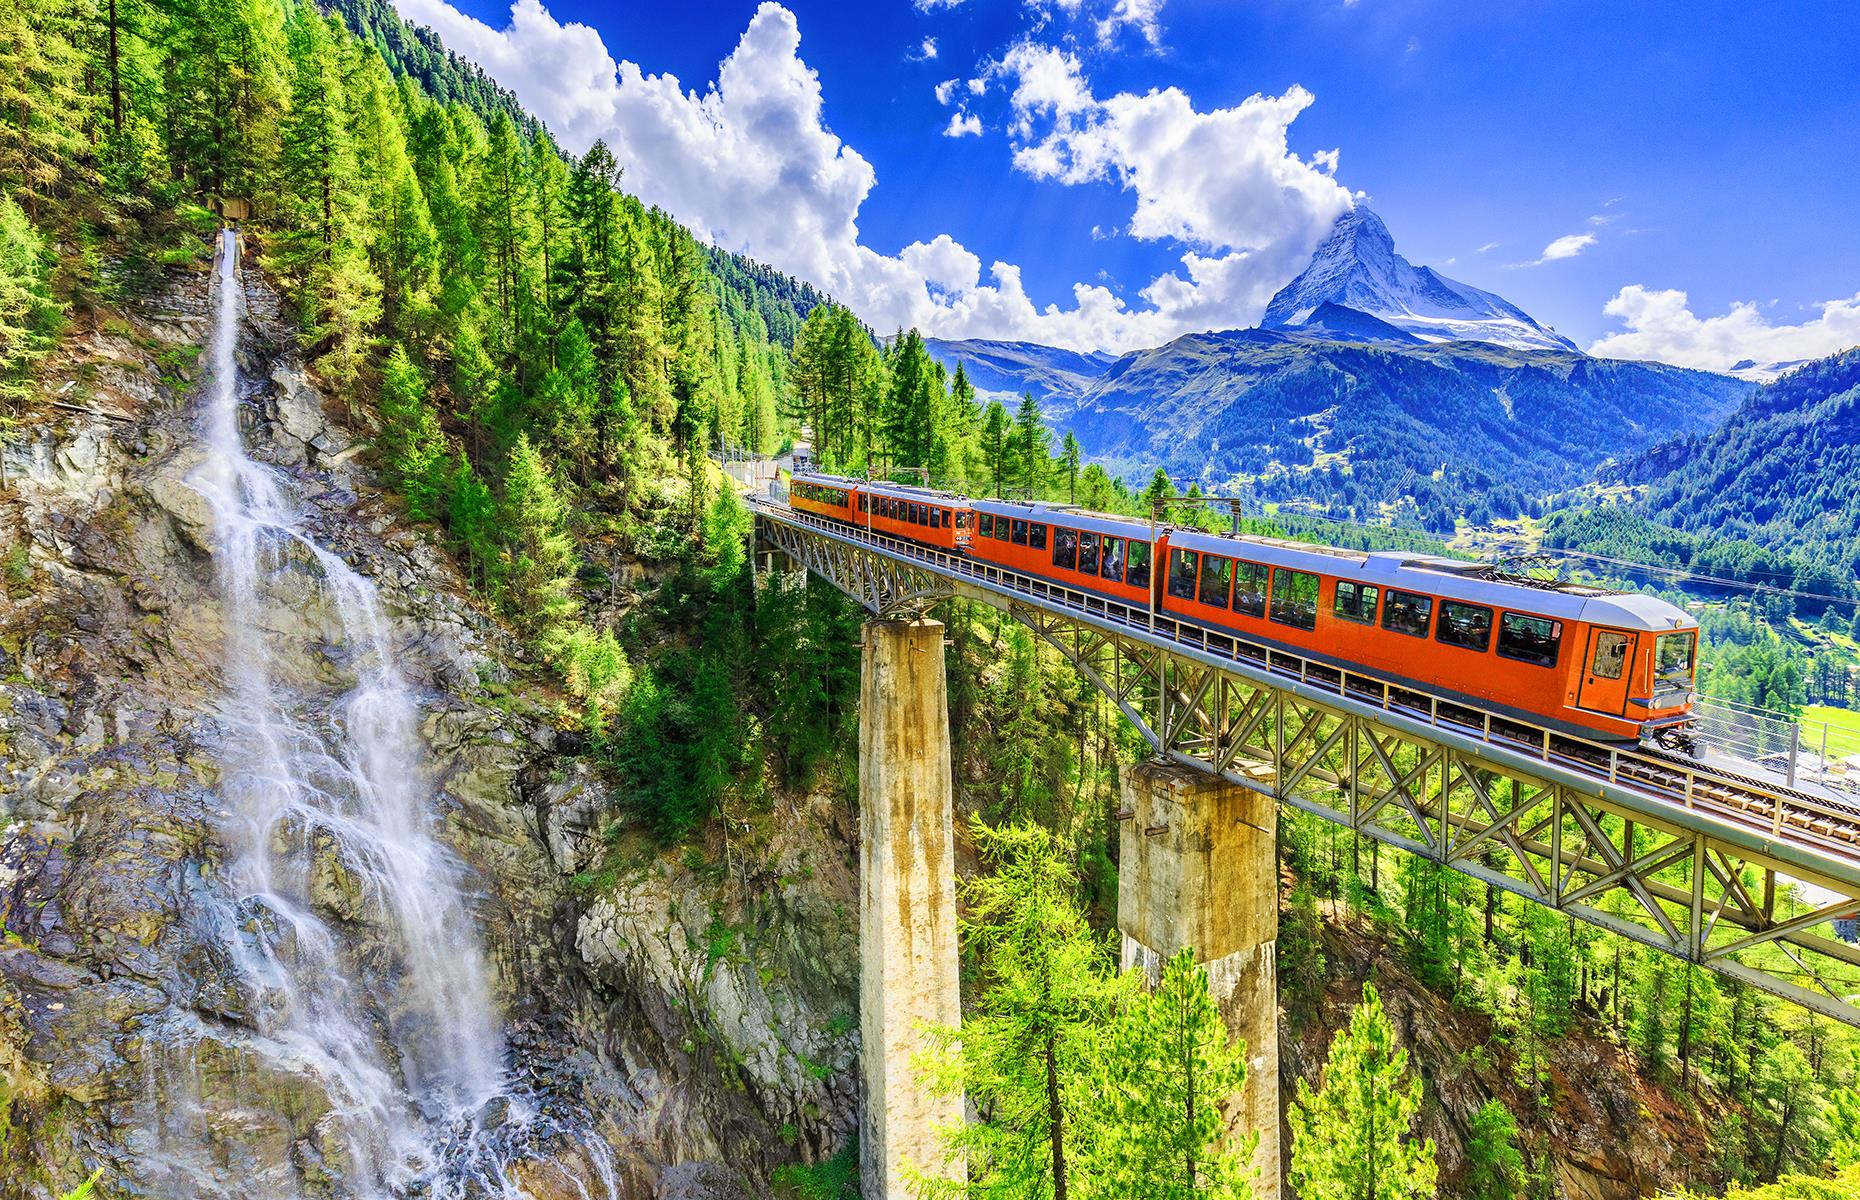 Visitors flock to this Central European country for its clean-as-a-whistle cities, laced with historic churches, opera houses and themed museums, and its spectacular natural spoils. Pictured is the Gornergrat Bahn, a cog railway in the Zermatt region that offers pinch-yourself views of waterfalls, forested peaks and the iconic Matterhorn mountain.